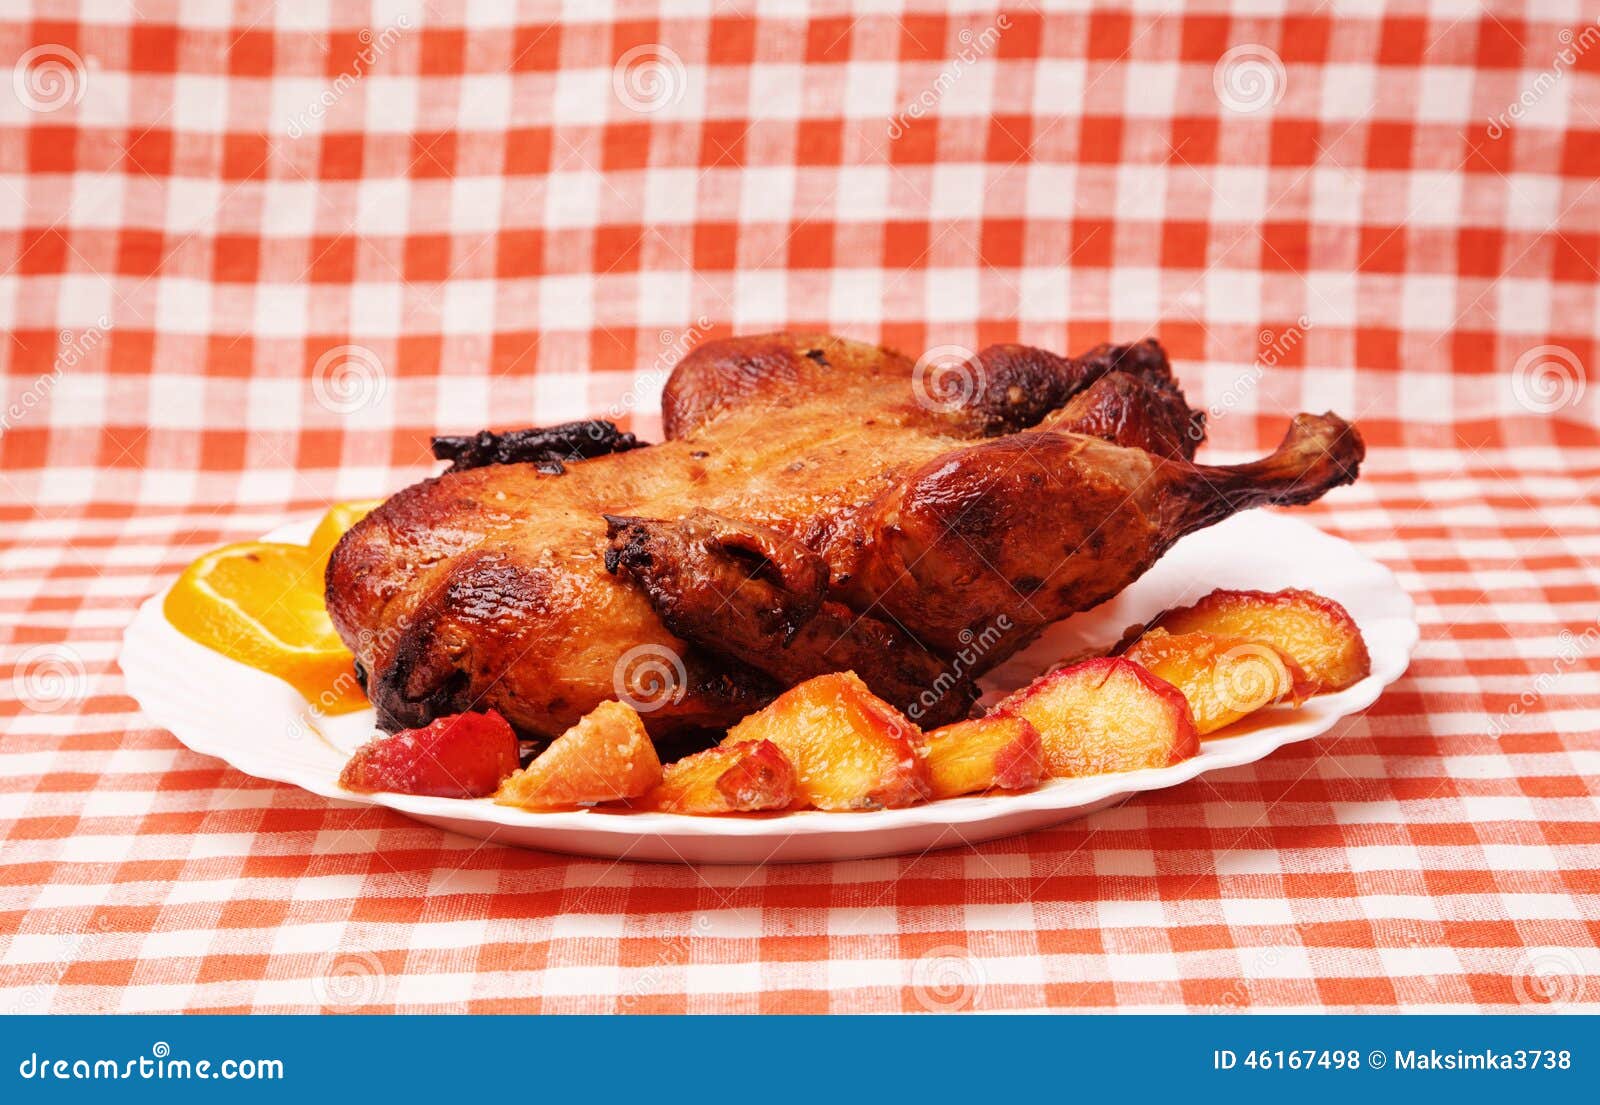 Roast duck with apples and oranges for christmas holidays